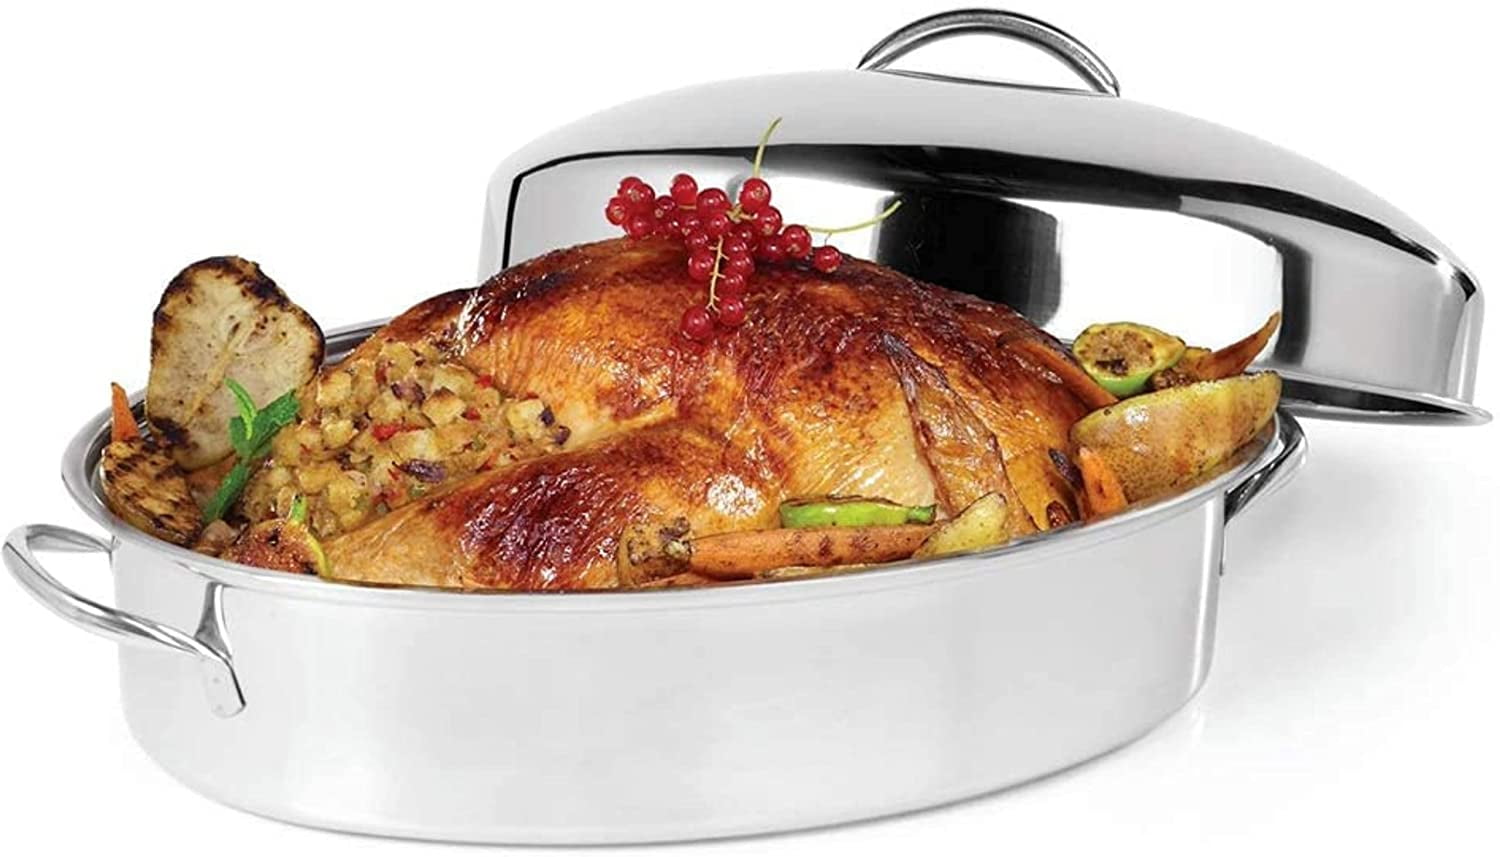 Casserole Dish W/ Roasting Rack for Everything From Thanksgiving Turkey to Easter Hams or Any Holiday Meal Lasagna Pan Professional Kitchen Quality Stainless Steel Roaster 